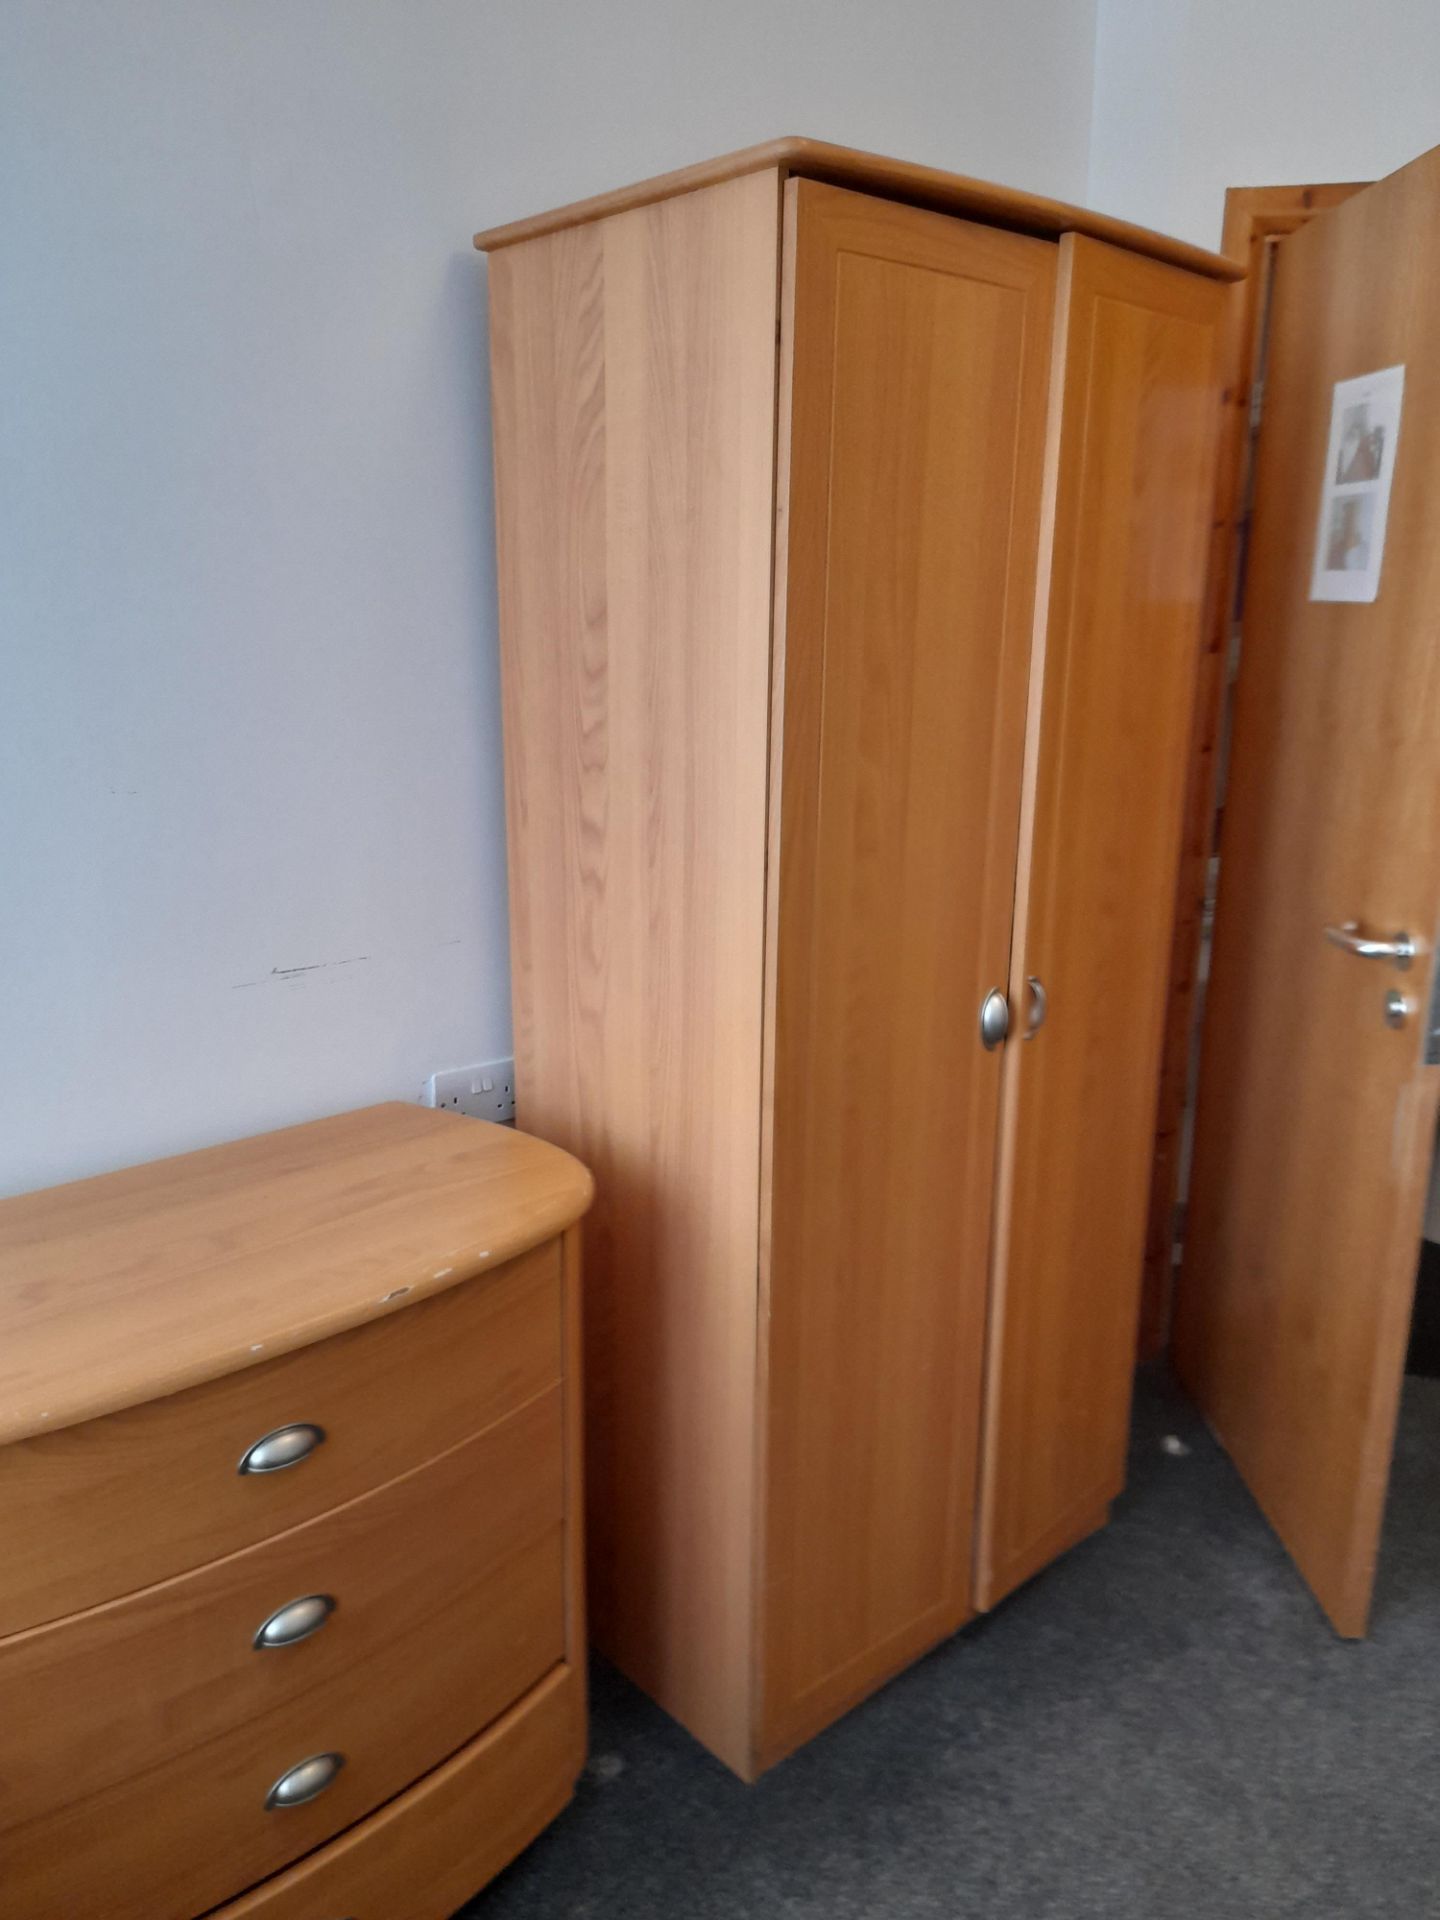 Contents of Bedroom 23 to include; Profile bed with Mattress, Wardrobe, Chest of Drawers, Bedside - Image 3 of 3